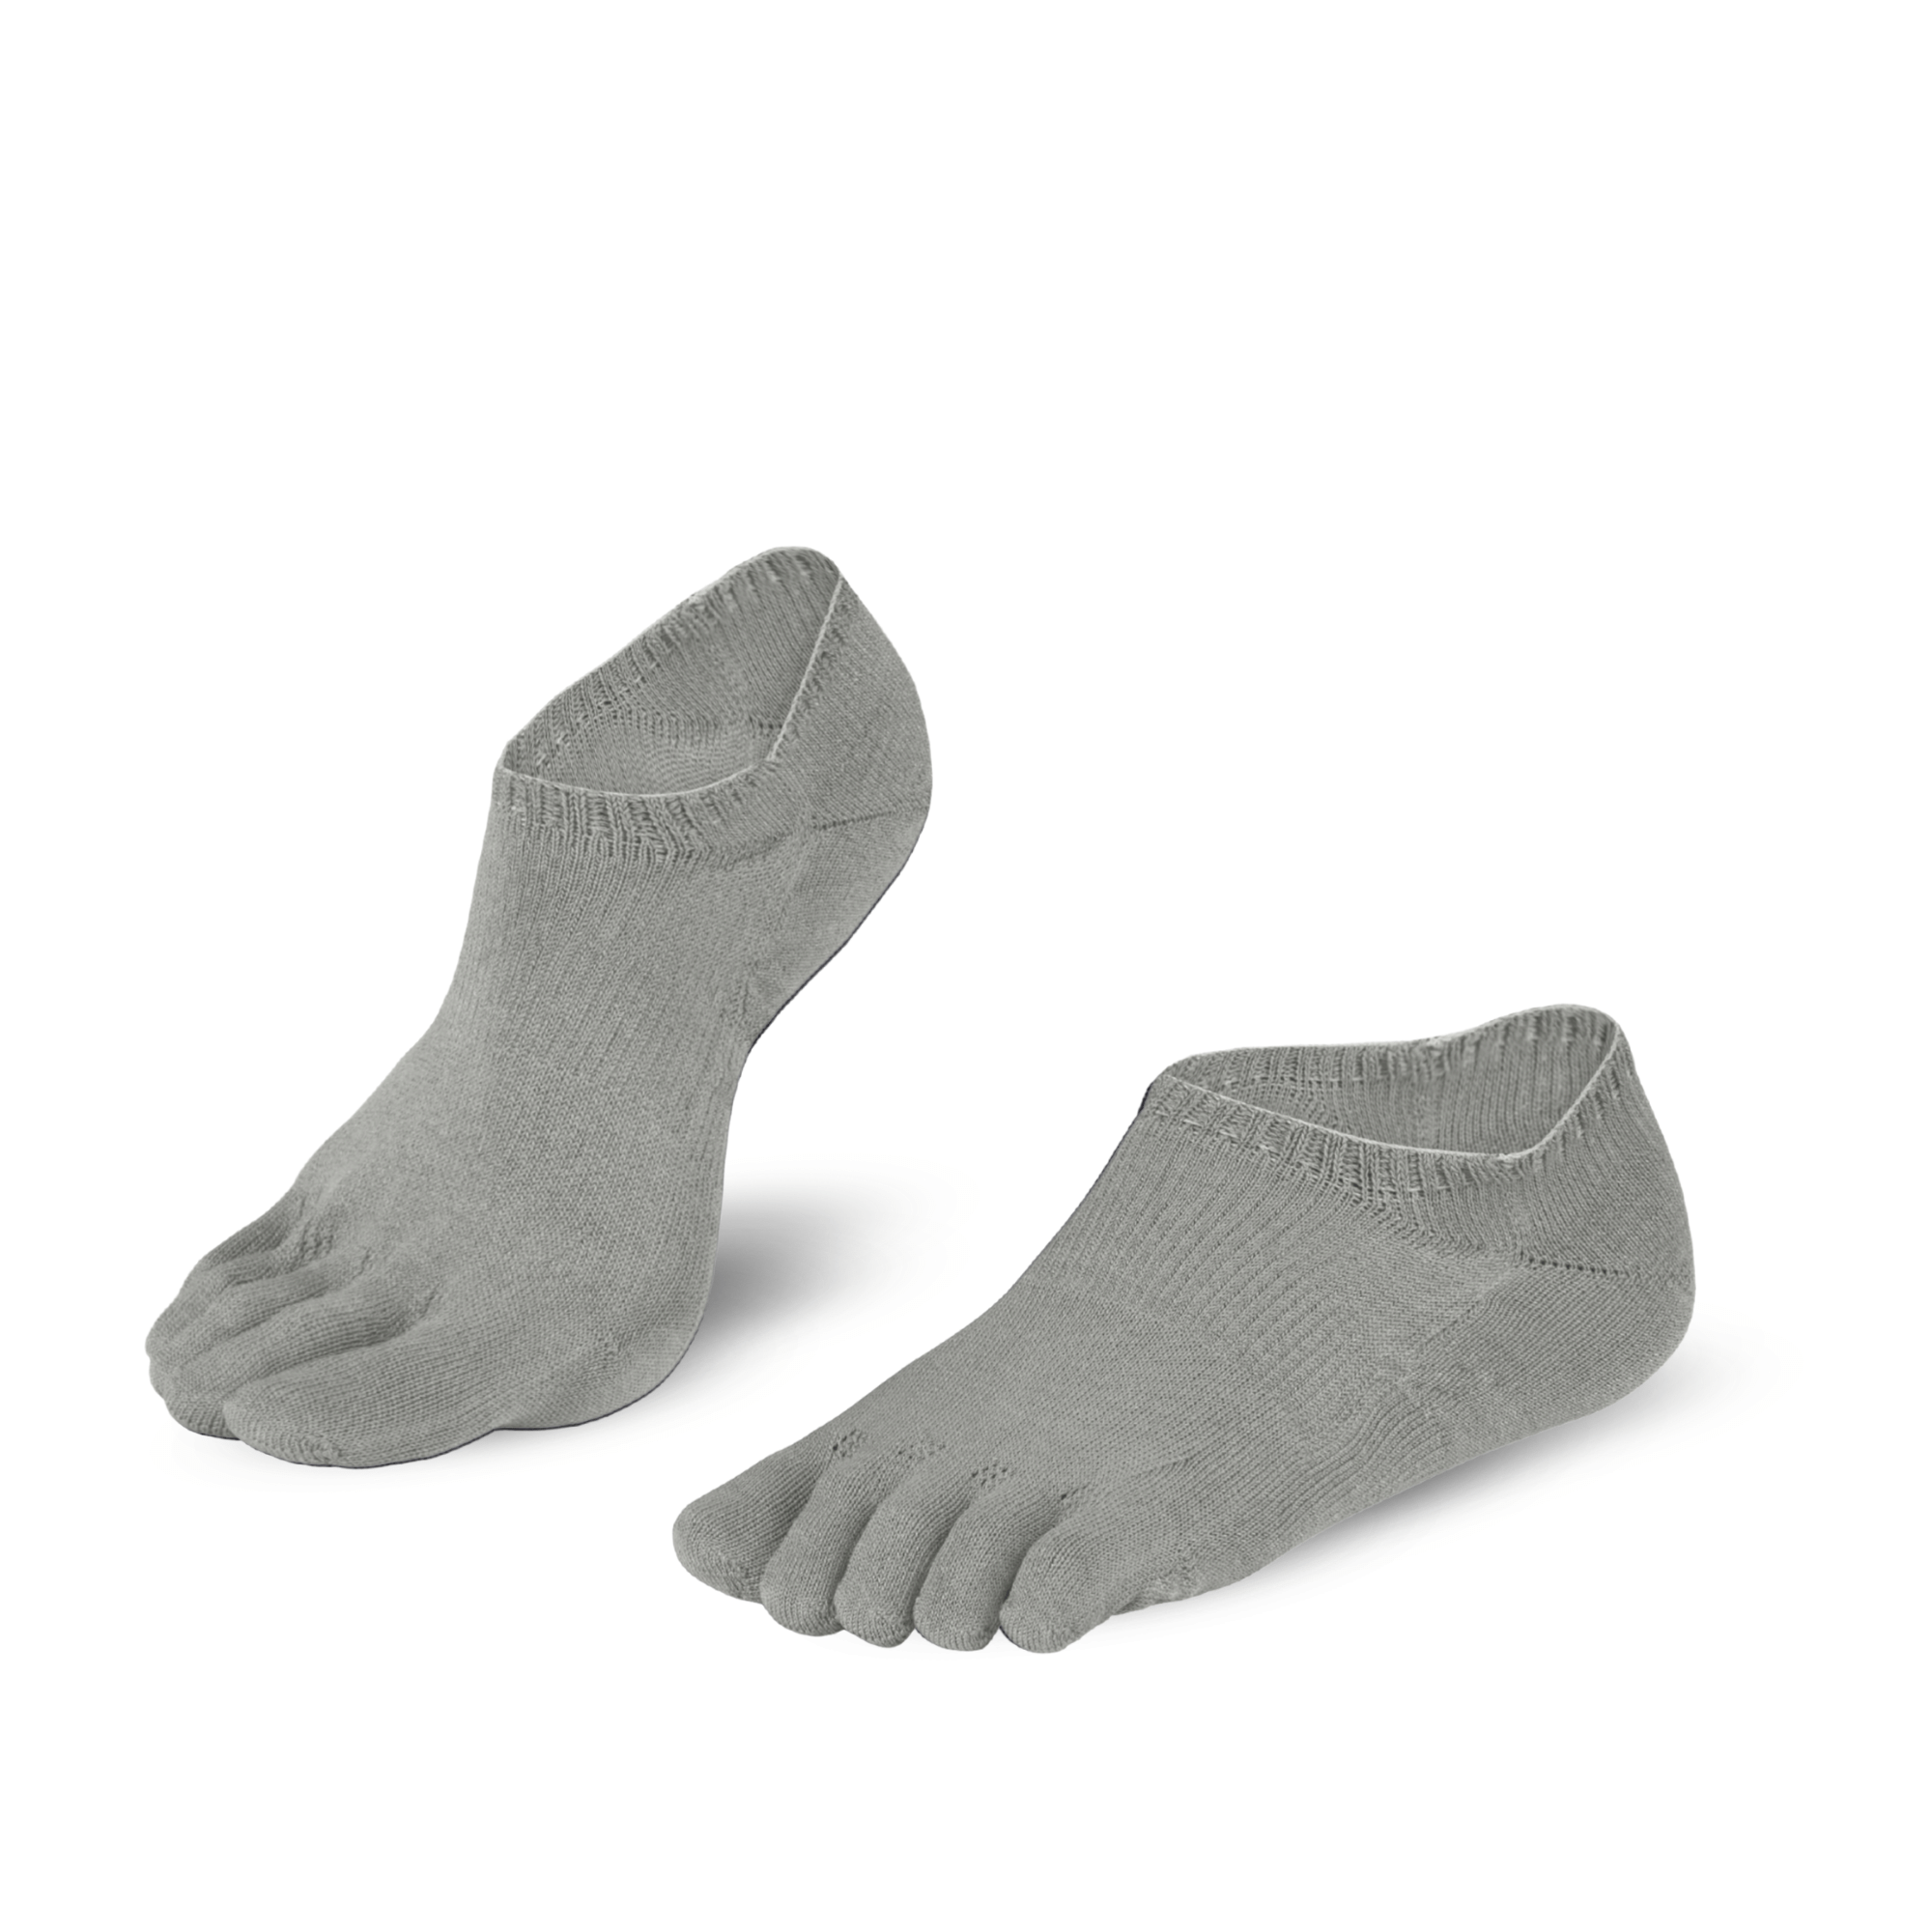 Track and Trail Running Mate Sneaker toe socks no show sports grey